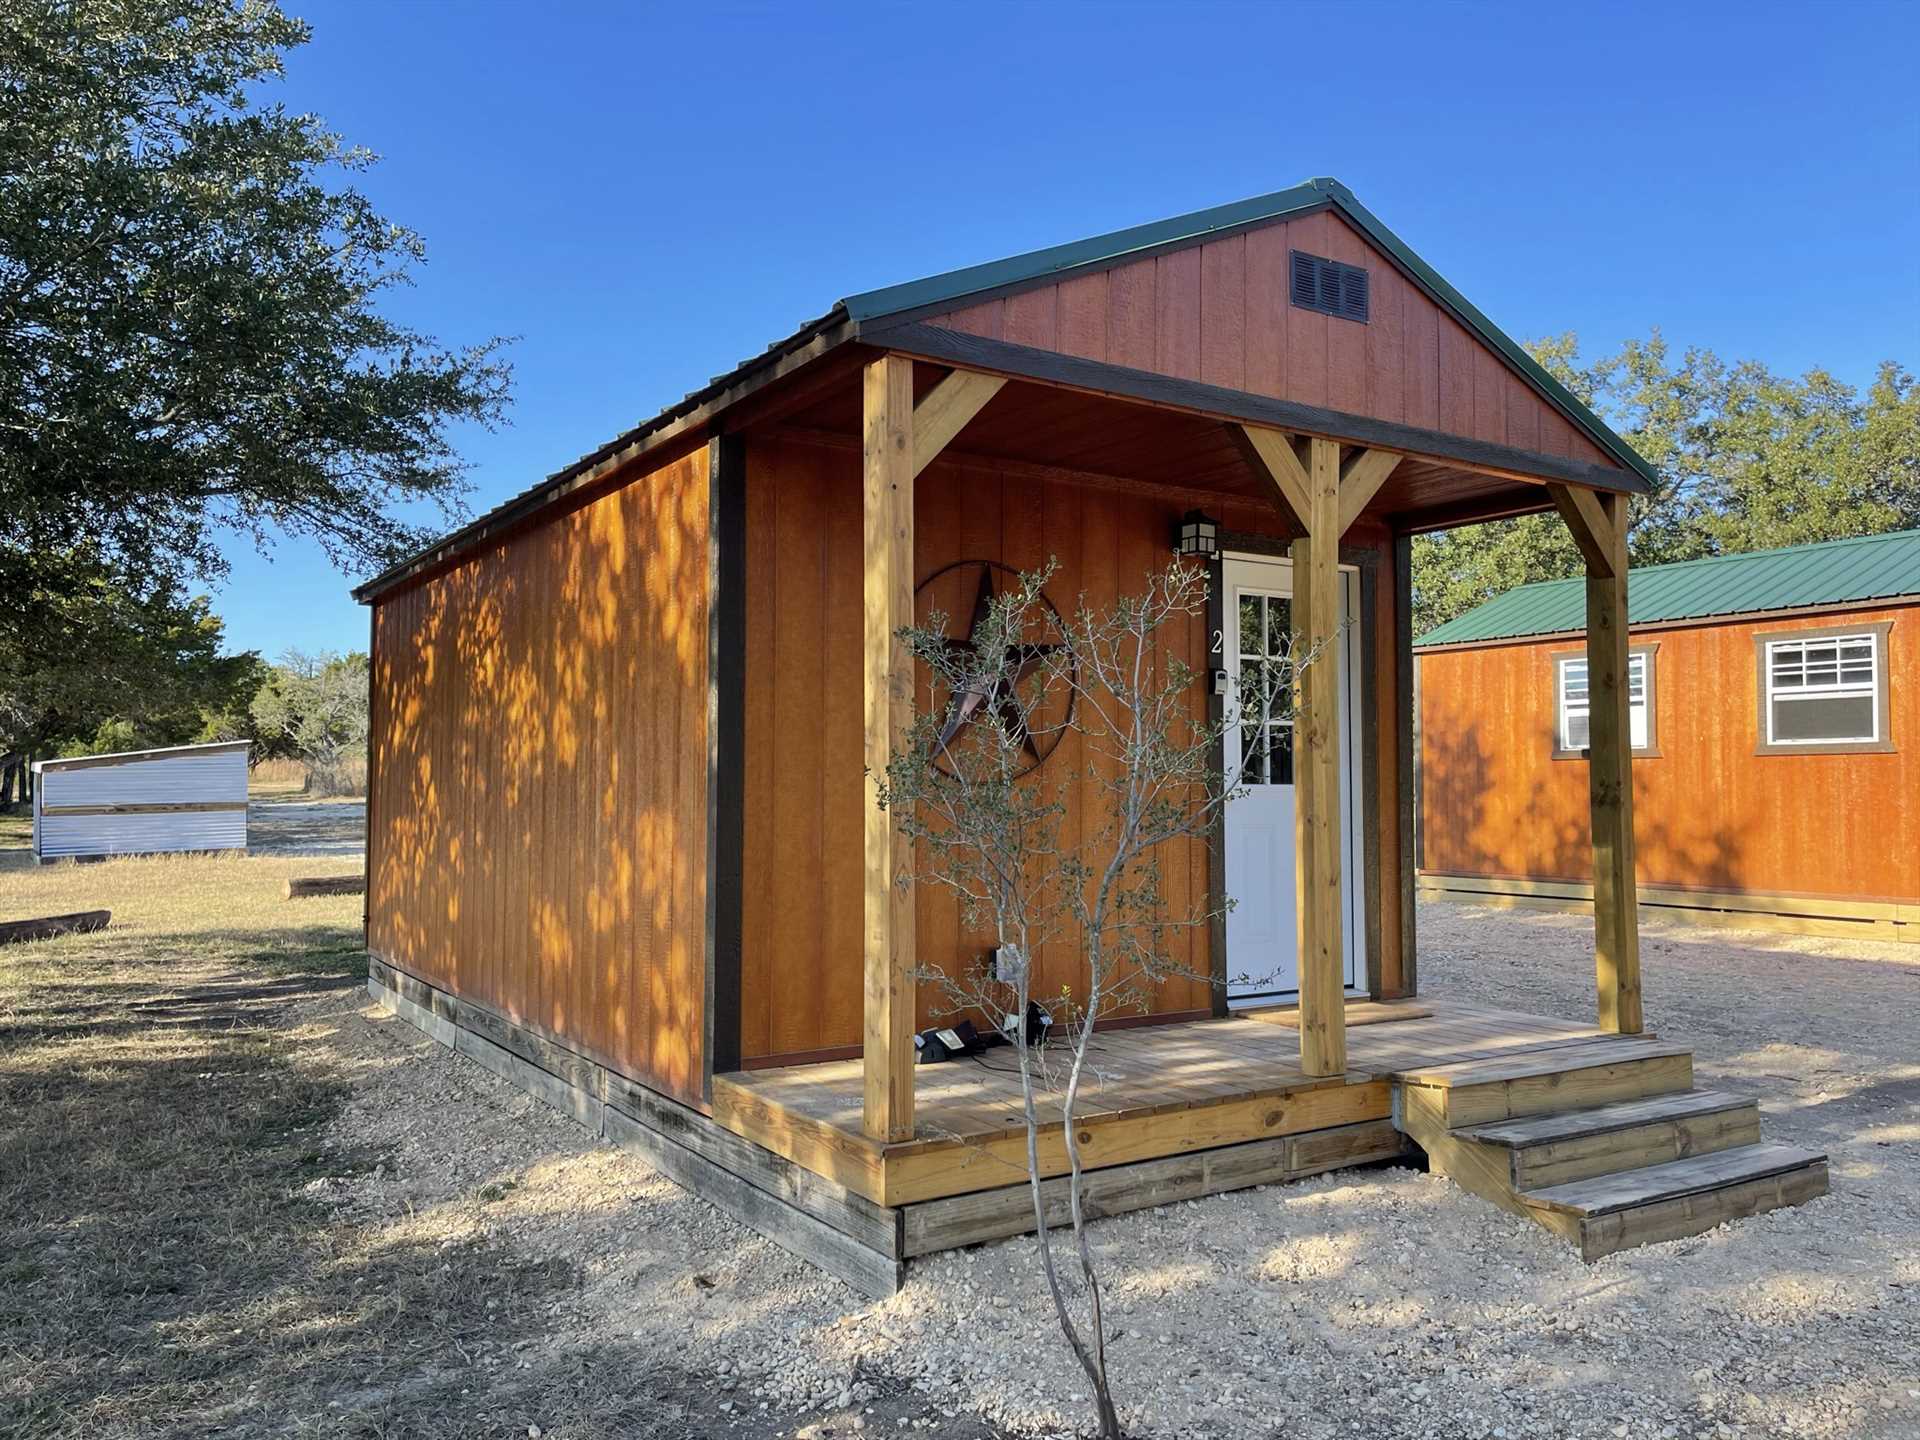                                                 Make the Great Heart Ranch Cabin #2 your intimate home for a Hill Country getaway! The cabin comfortably sleeps up to three.